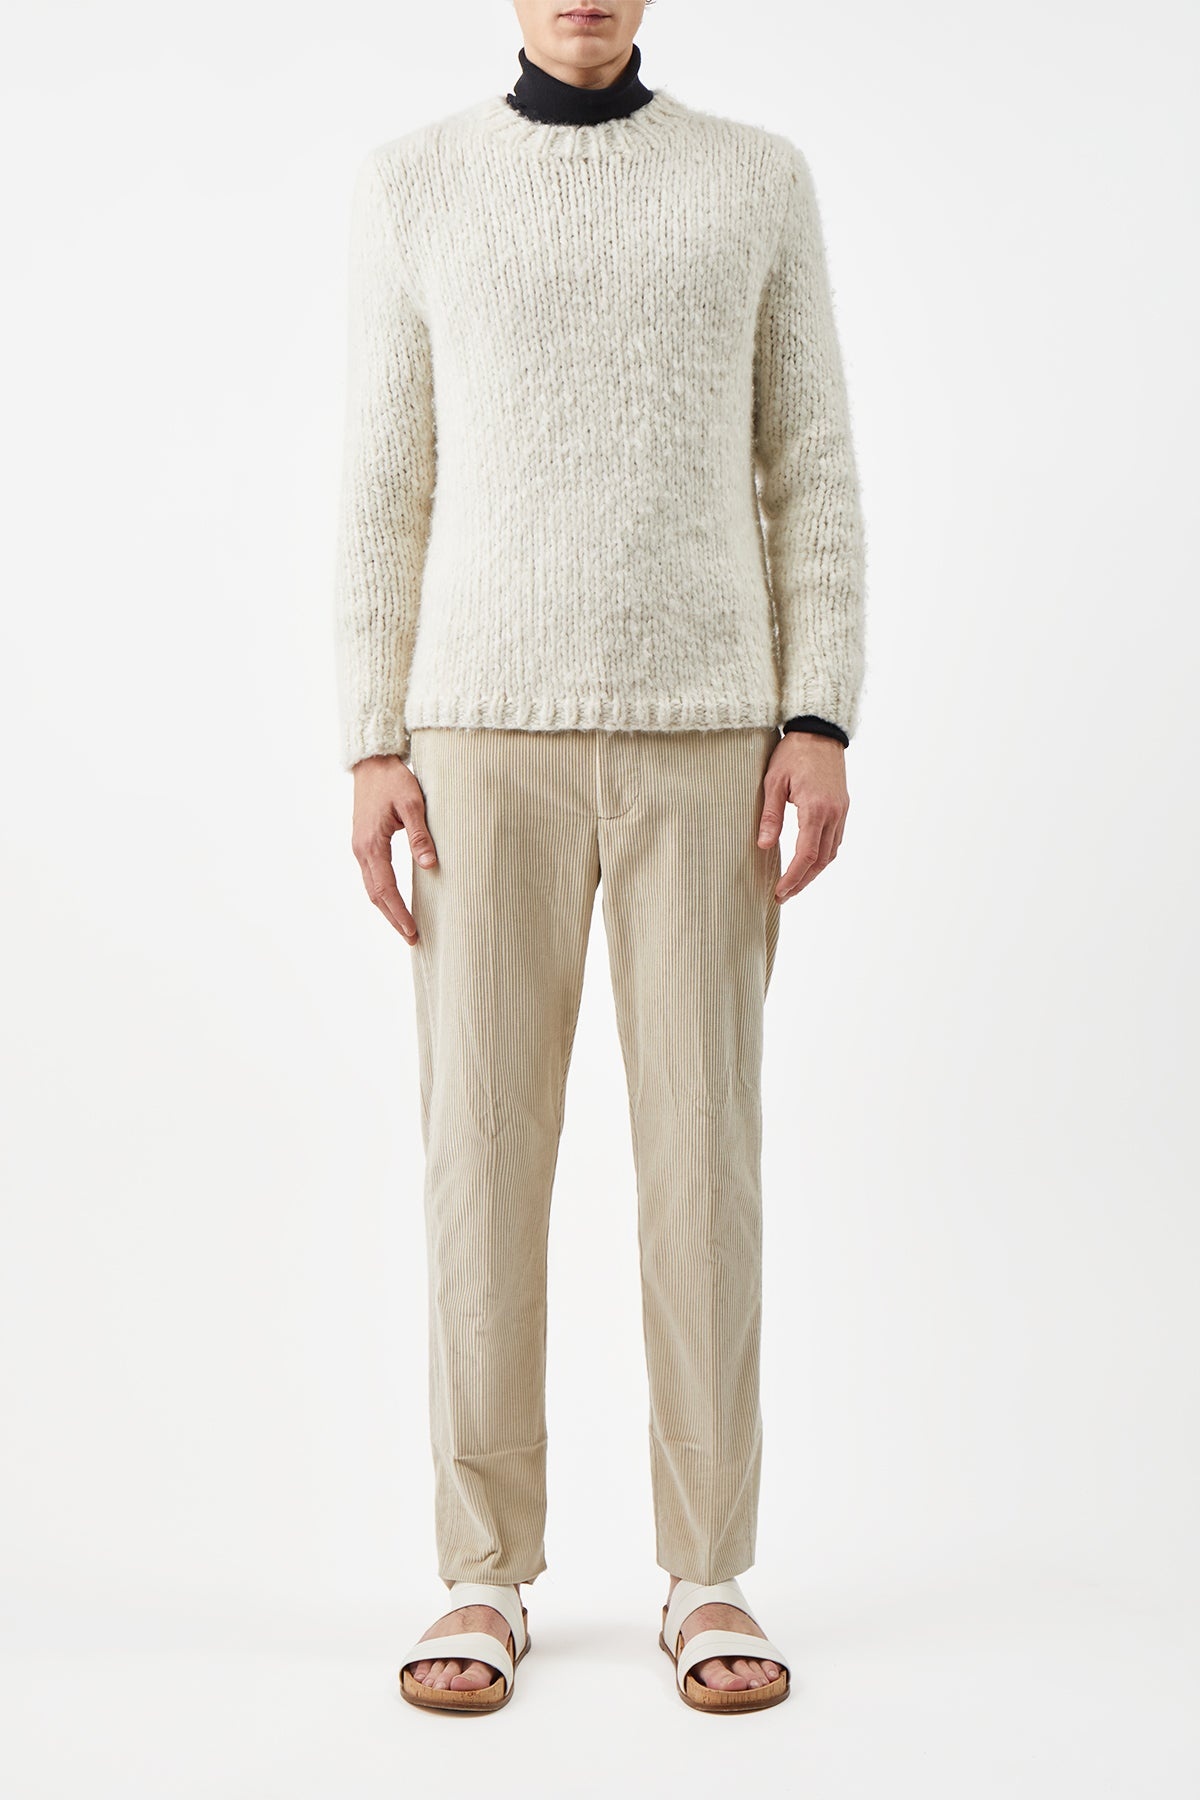 Lawrence Knit Sweater in Ivory Welfat Cashmere - 2